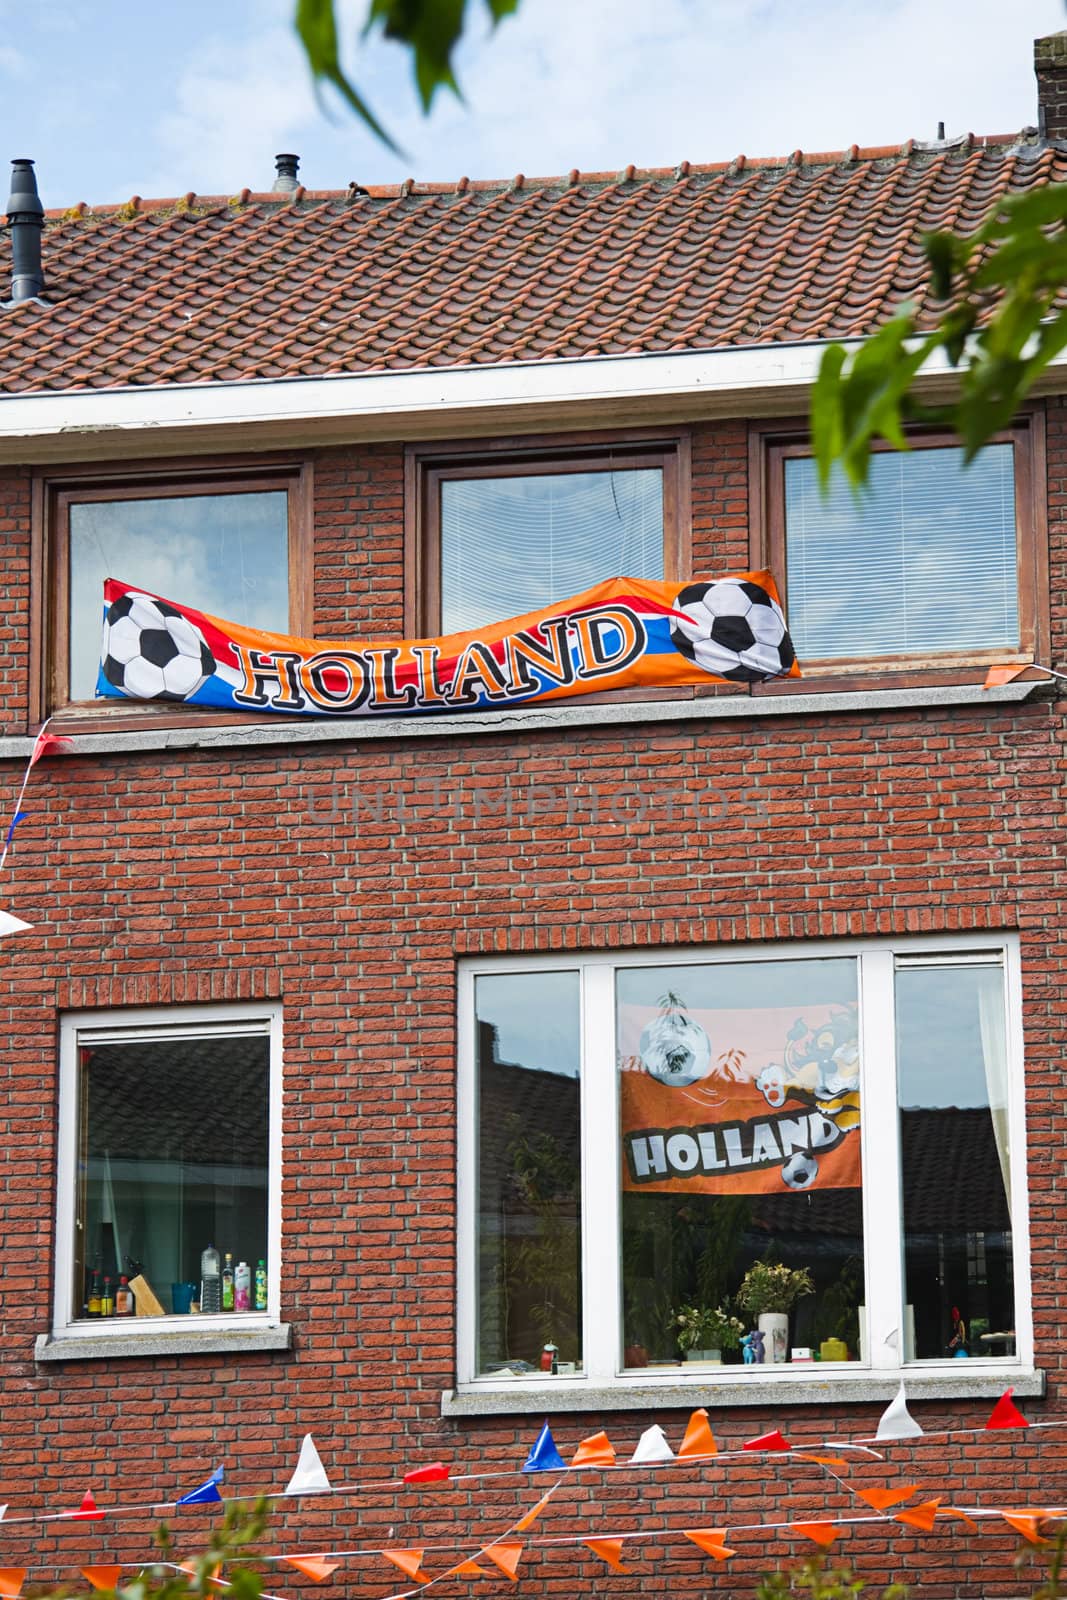 Support of Dutch soccerteam in the Netherlands by Colette